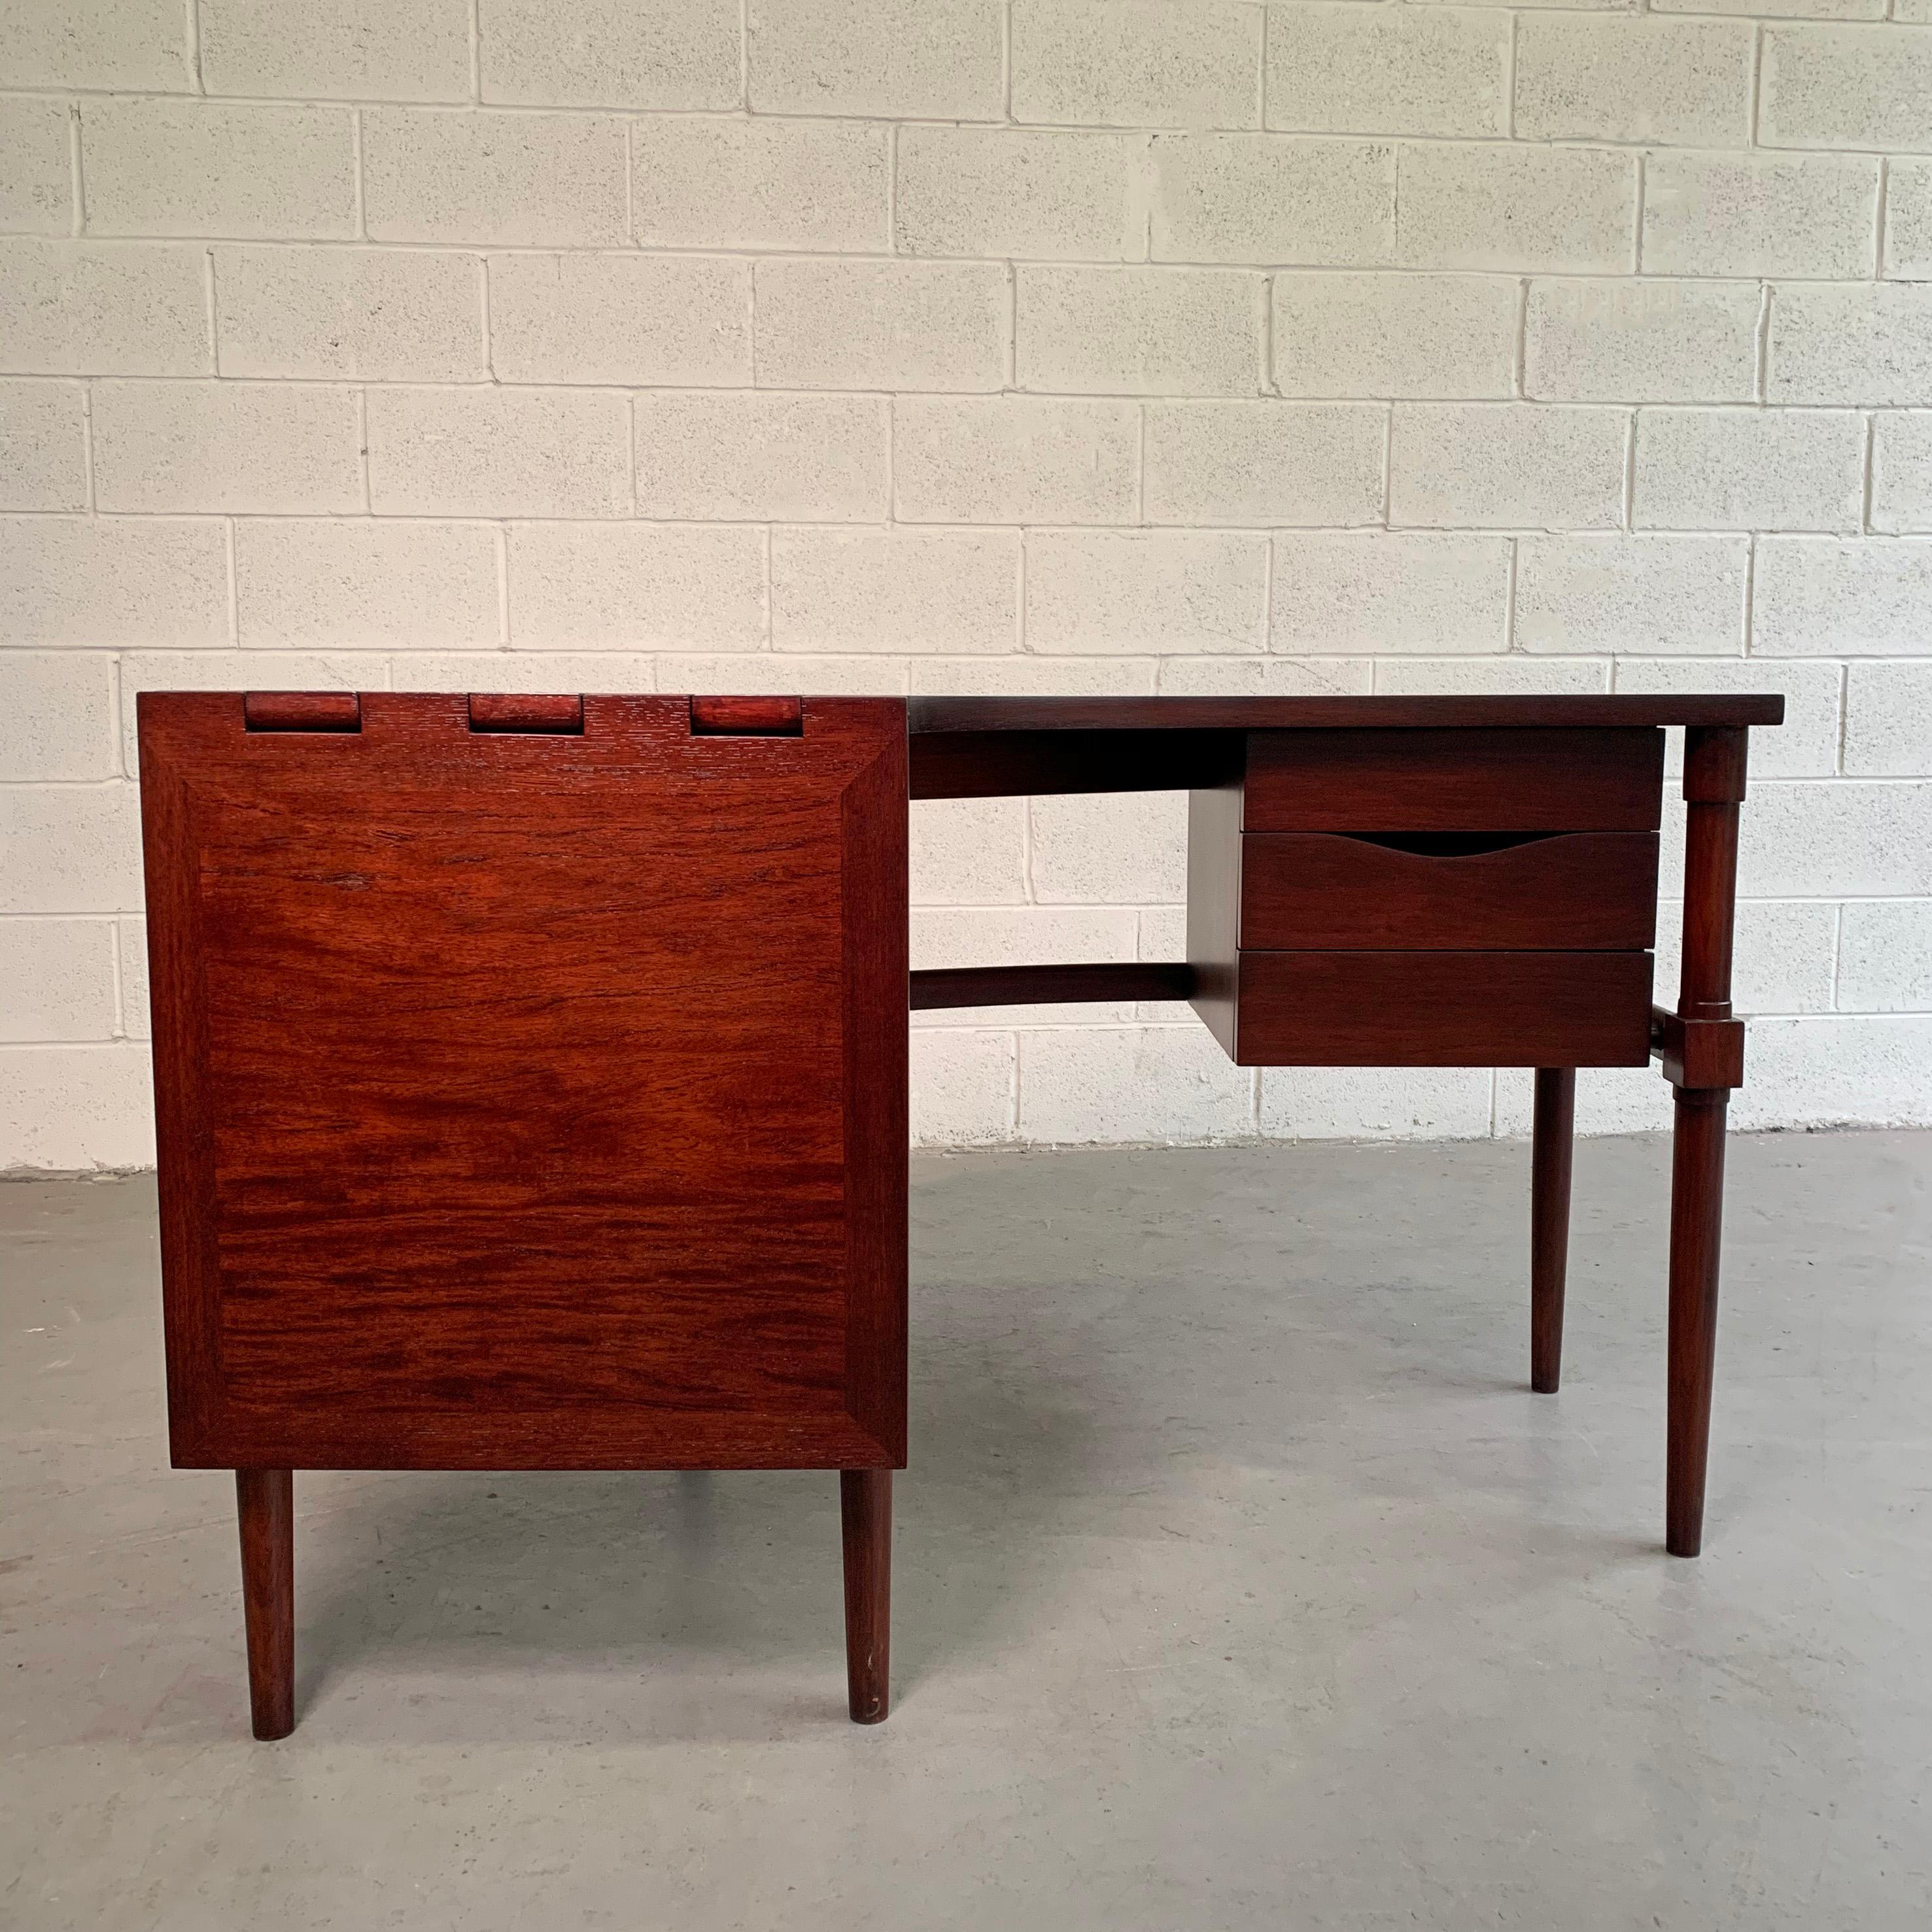 Mid-Century Modern, crescent-shaped, walnut desk features wonderful details throughout with 3 drawers and a 20 x 20 inch drop leaf to extend for more surface. The overall surface width of the desk is 20 inches and is 54 inches deep when fully